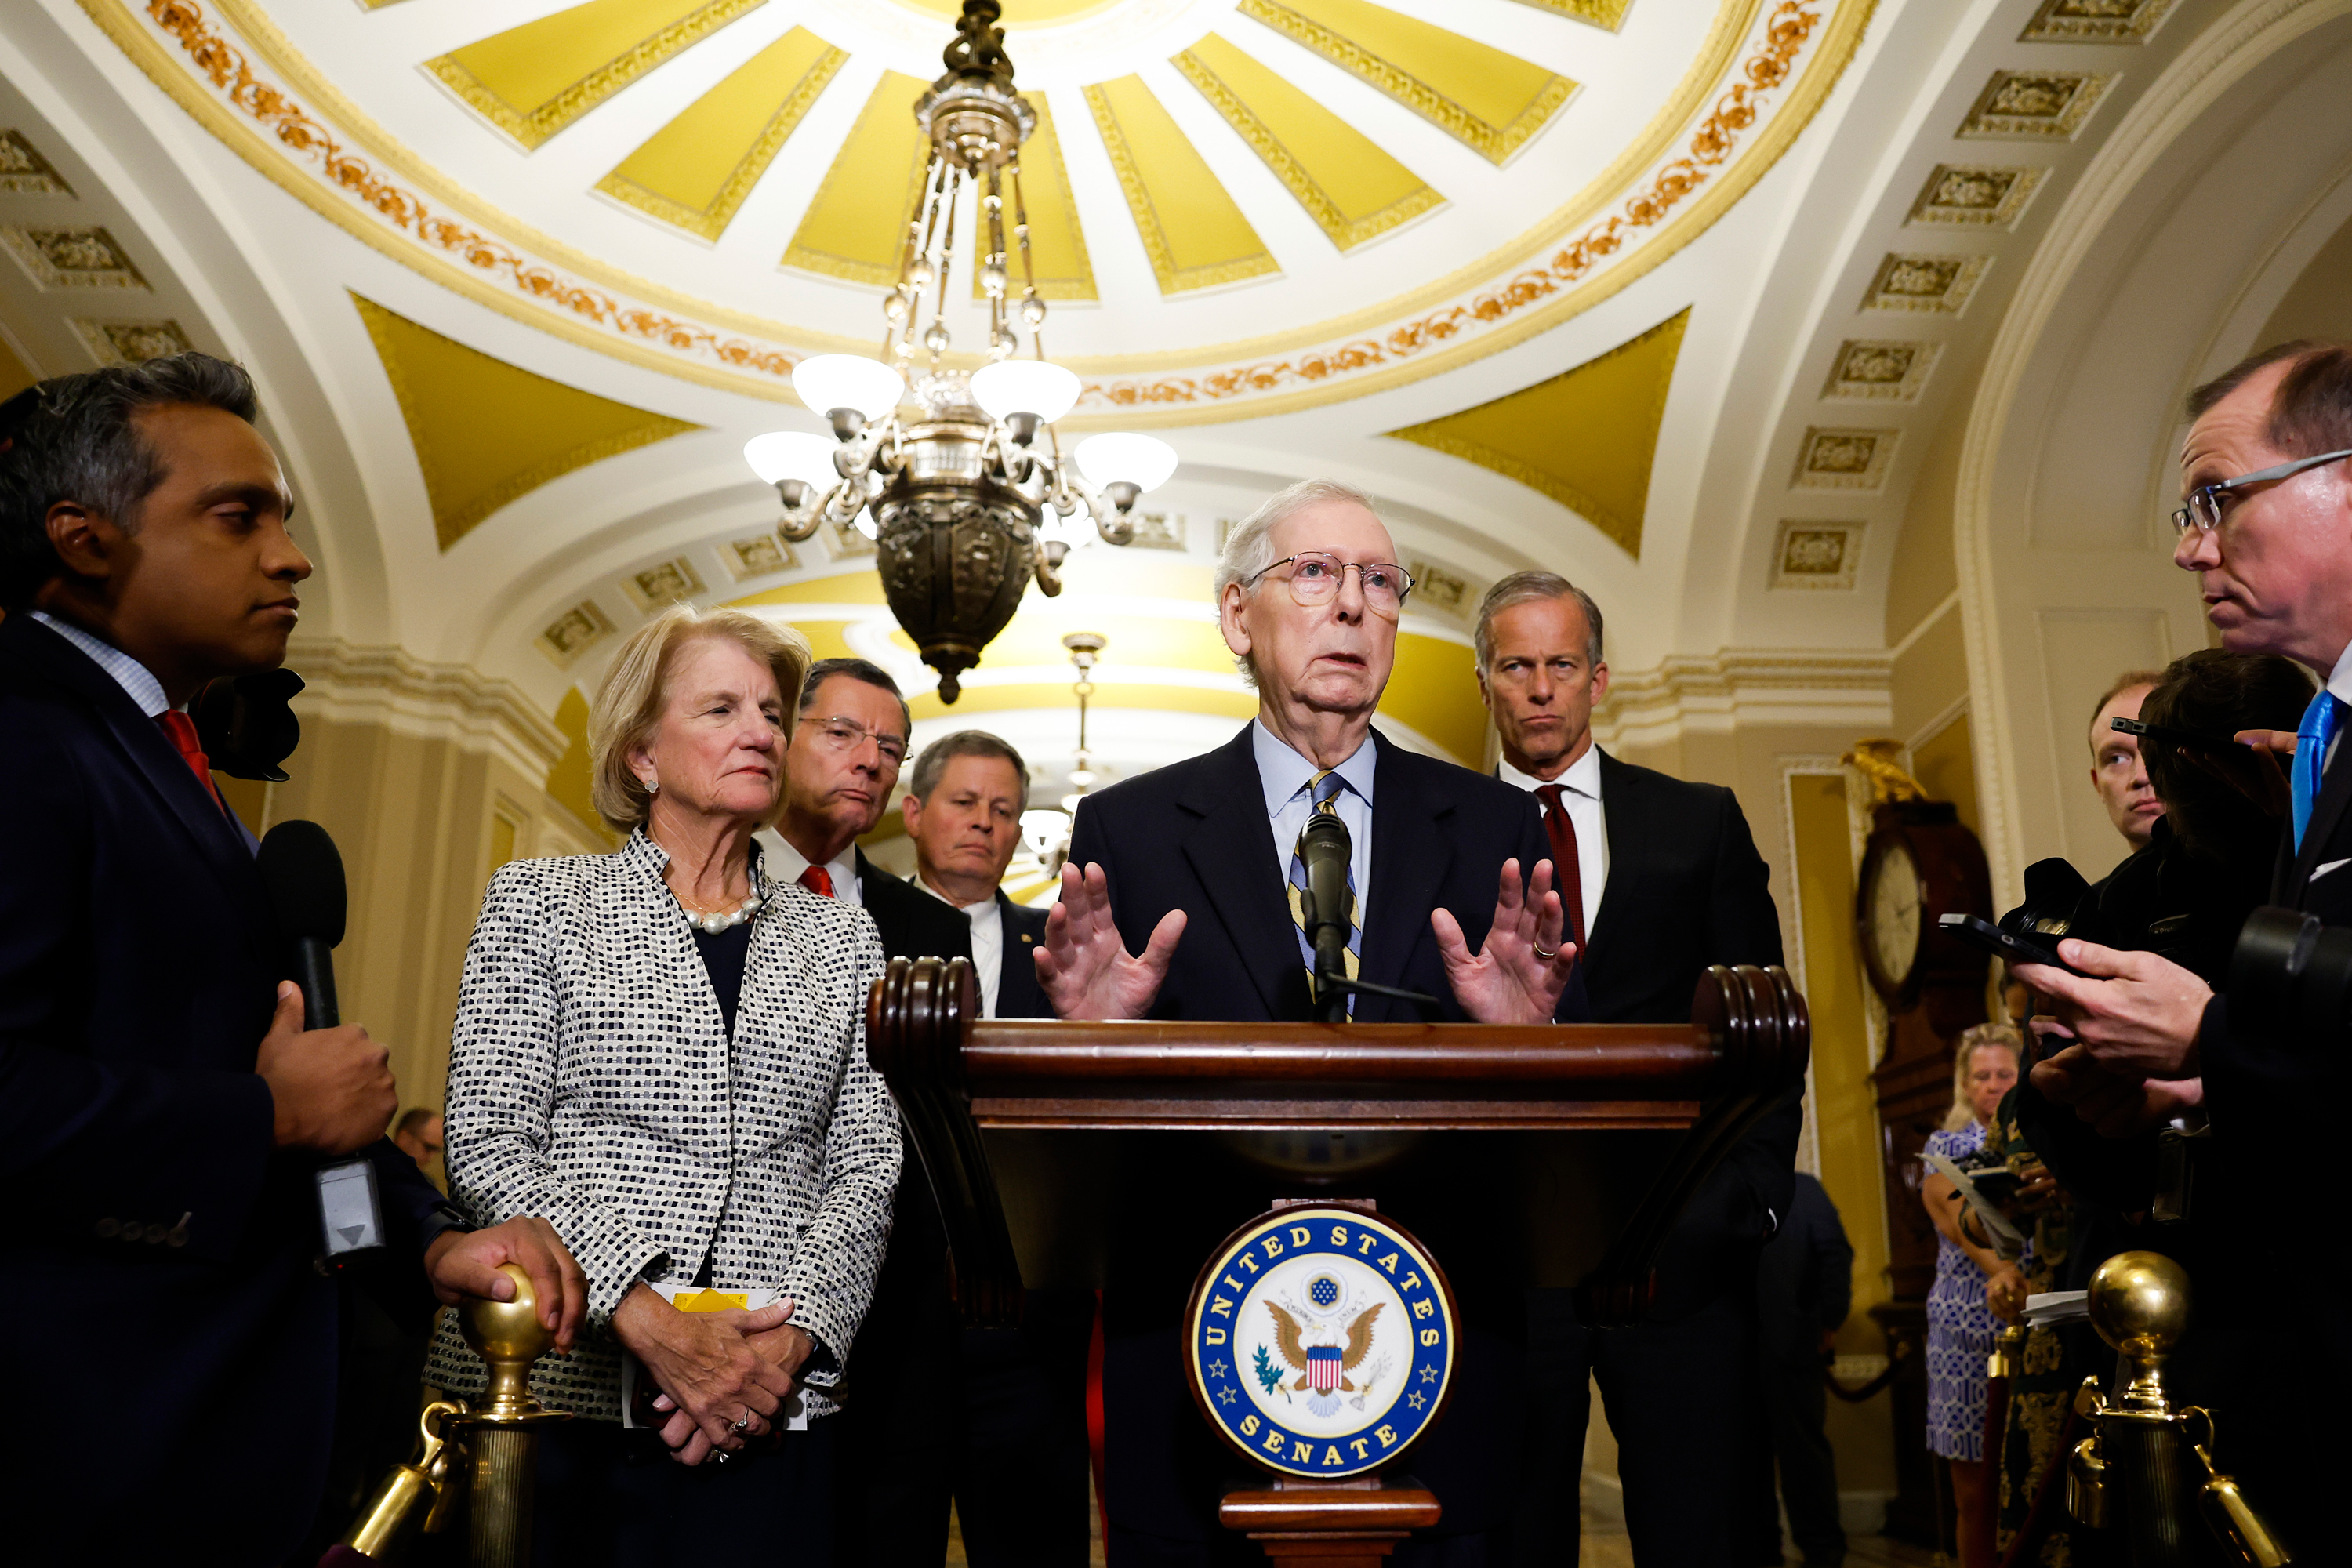 Mitch McConnell speaks during a news conference following the weekly Republican Senate policy luncheon meeting at the Capitol Building on September 19, in Washington, DC.